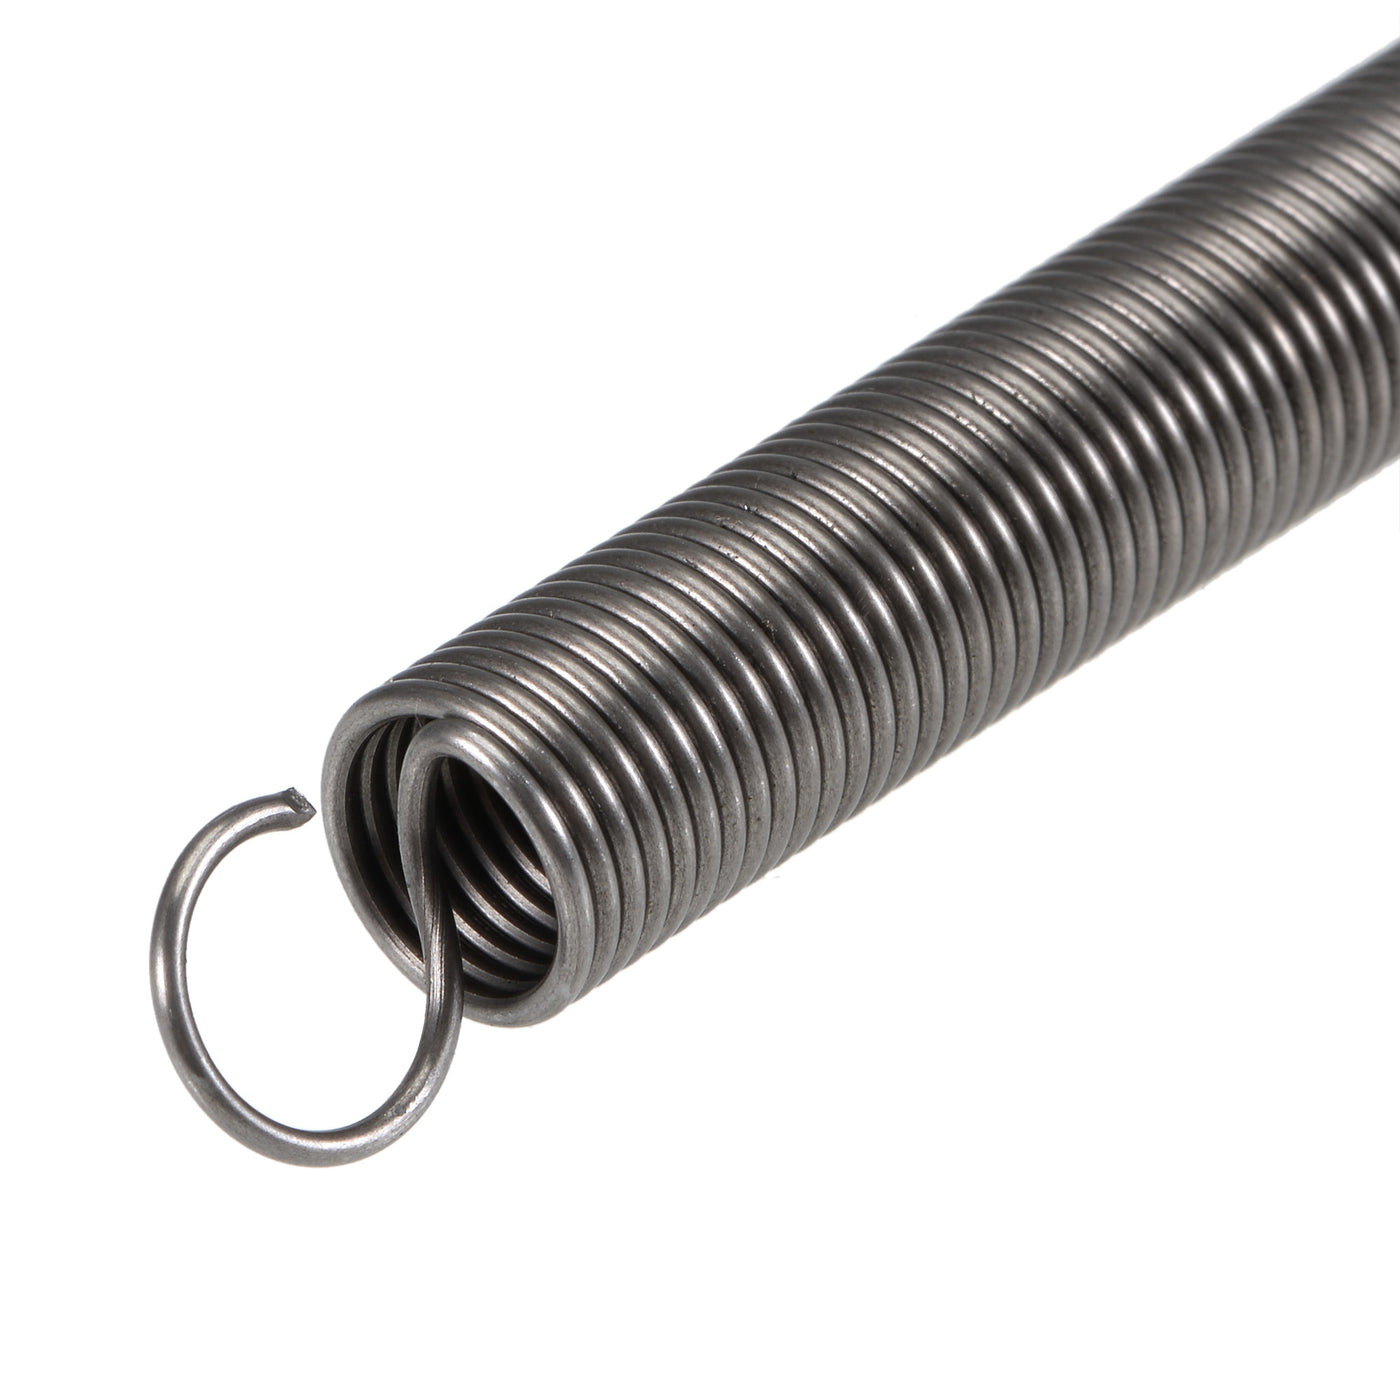 uxcell Uxcell 1mmx10mmx80mm Extended Tension Spring ,3.3Lbs Load Capacity,Grey 4pcs